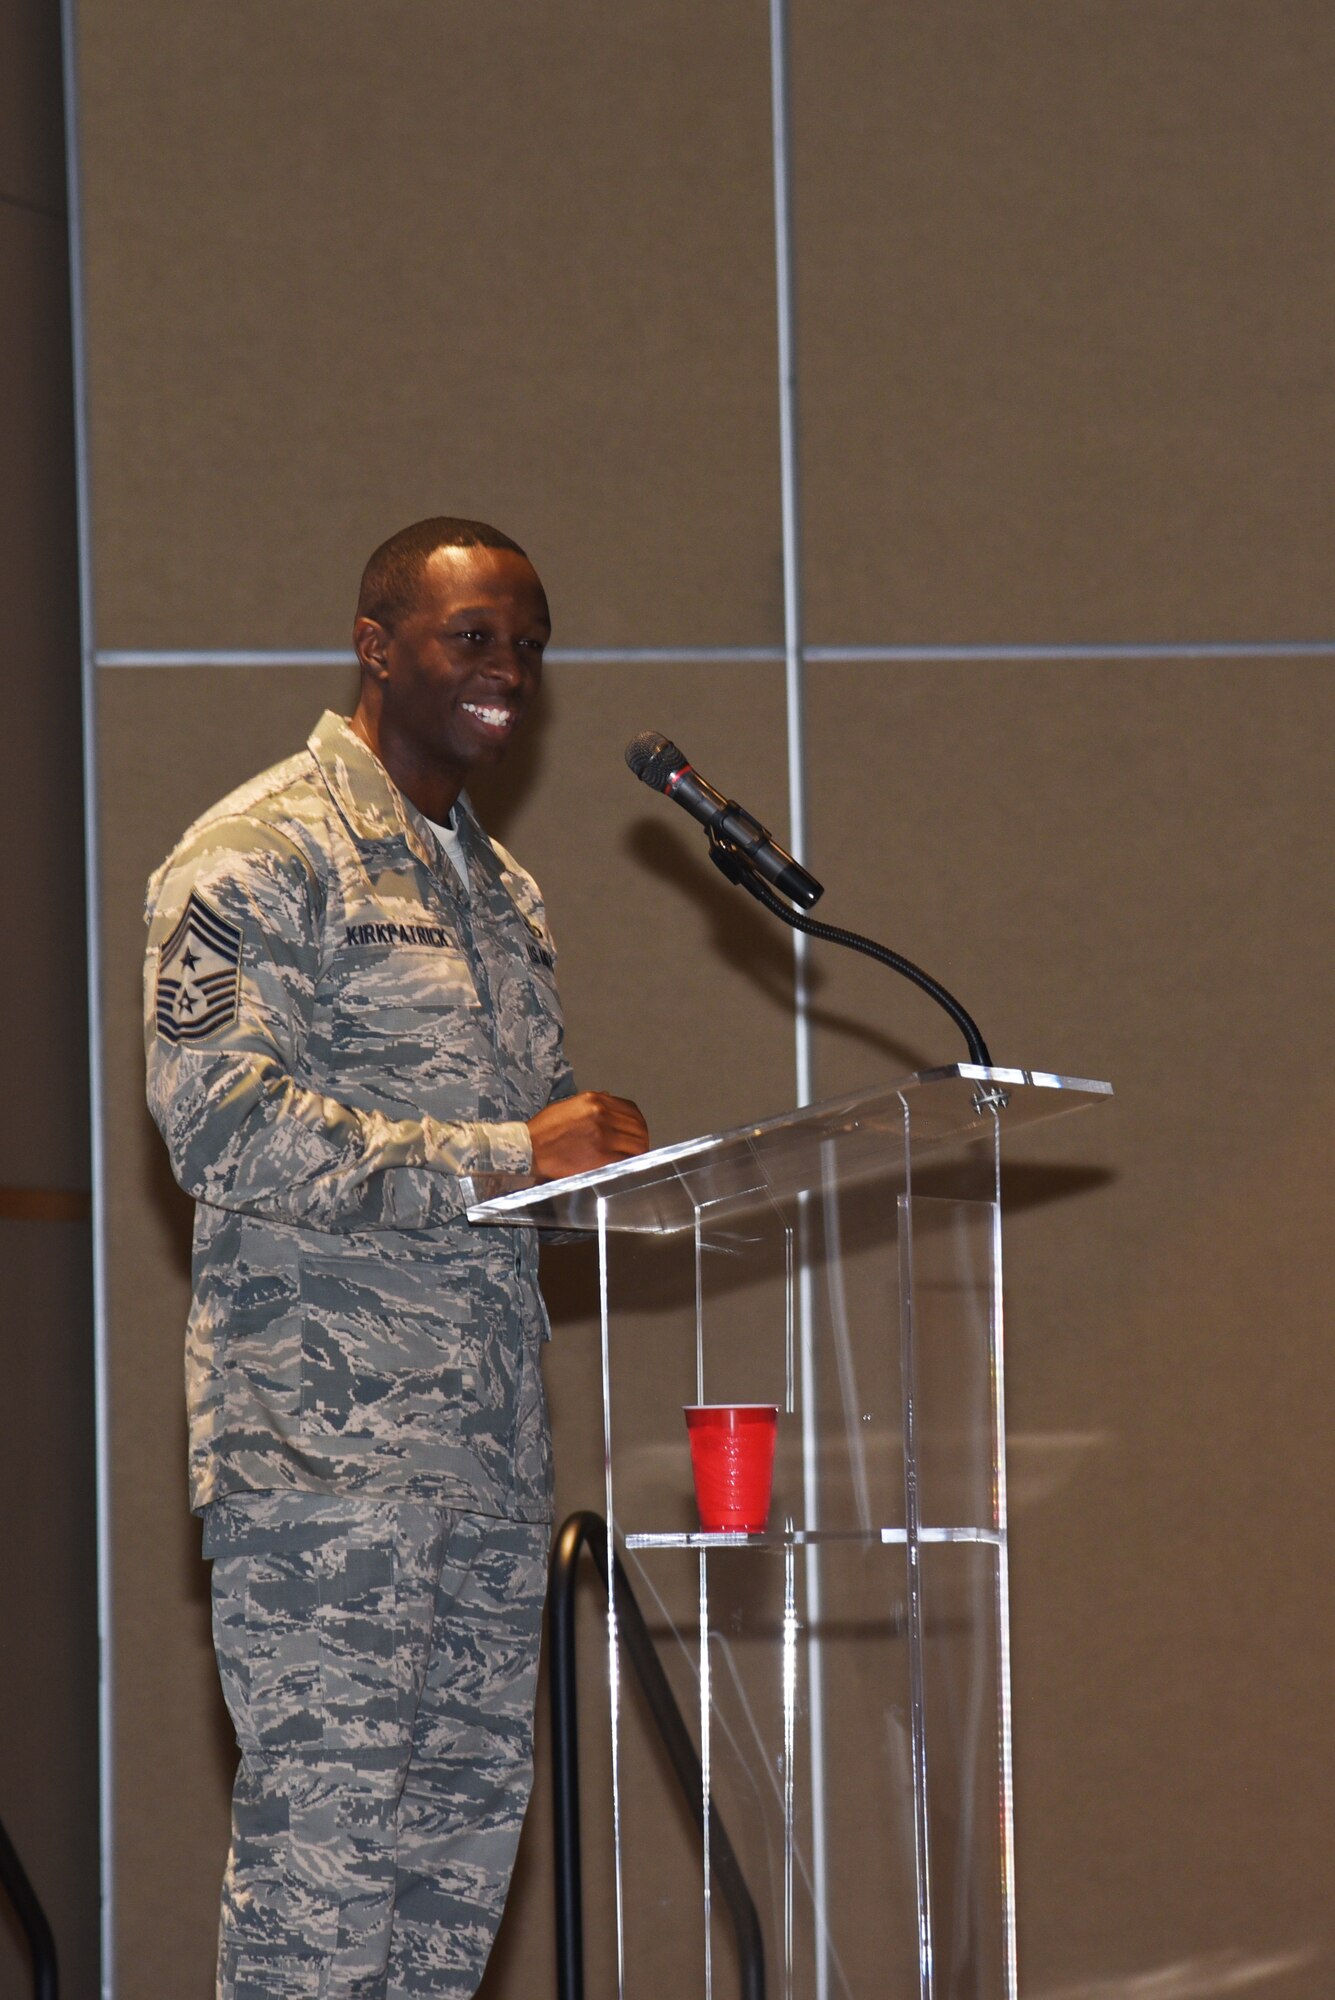 U.S. Air Force Chief Master Sgt. Lavor Kirkpatrick, 17th Training Wing command chief, speaks during a San Angelo Chamber of Commerce luncheon at the McNease Convention Center in San Angelo, Texas, Aug. 14, 2018. During his speech, Kirkpatrick talked about his previous experiences at Goodfellow Air Force Base and how he looks forward to what his future holds here. (U.S. Air Force photo by Staff Sgt. Joshua Edwards/Released)